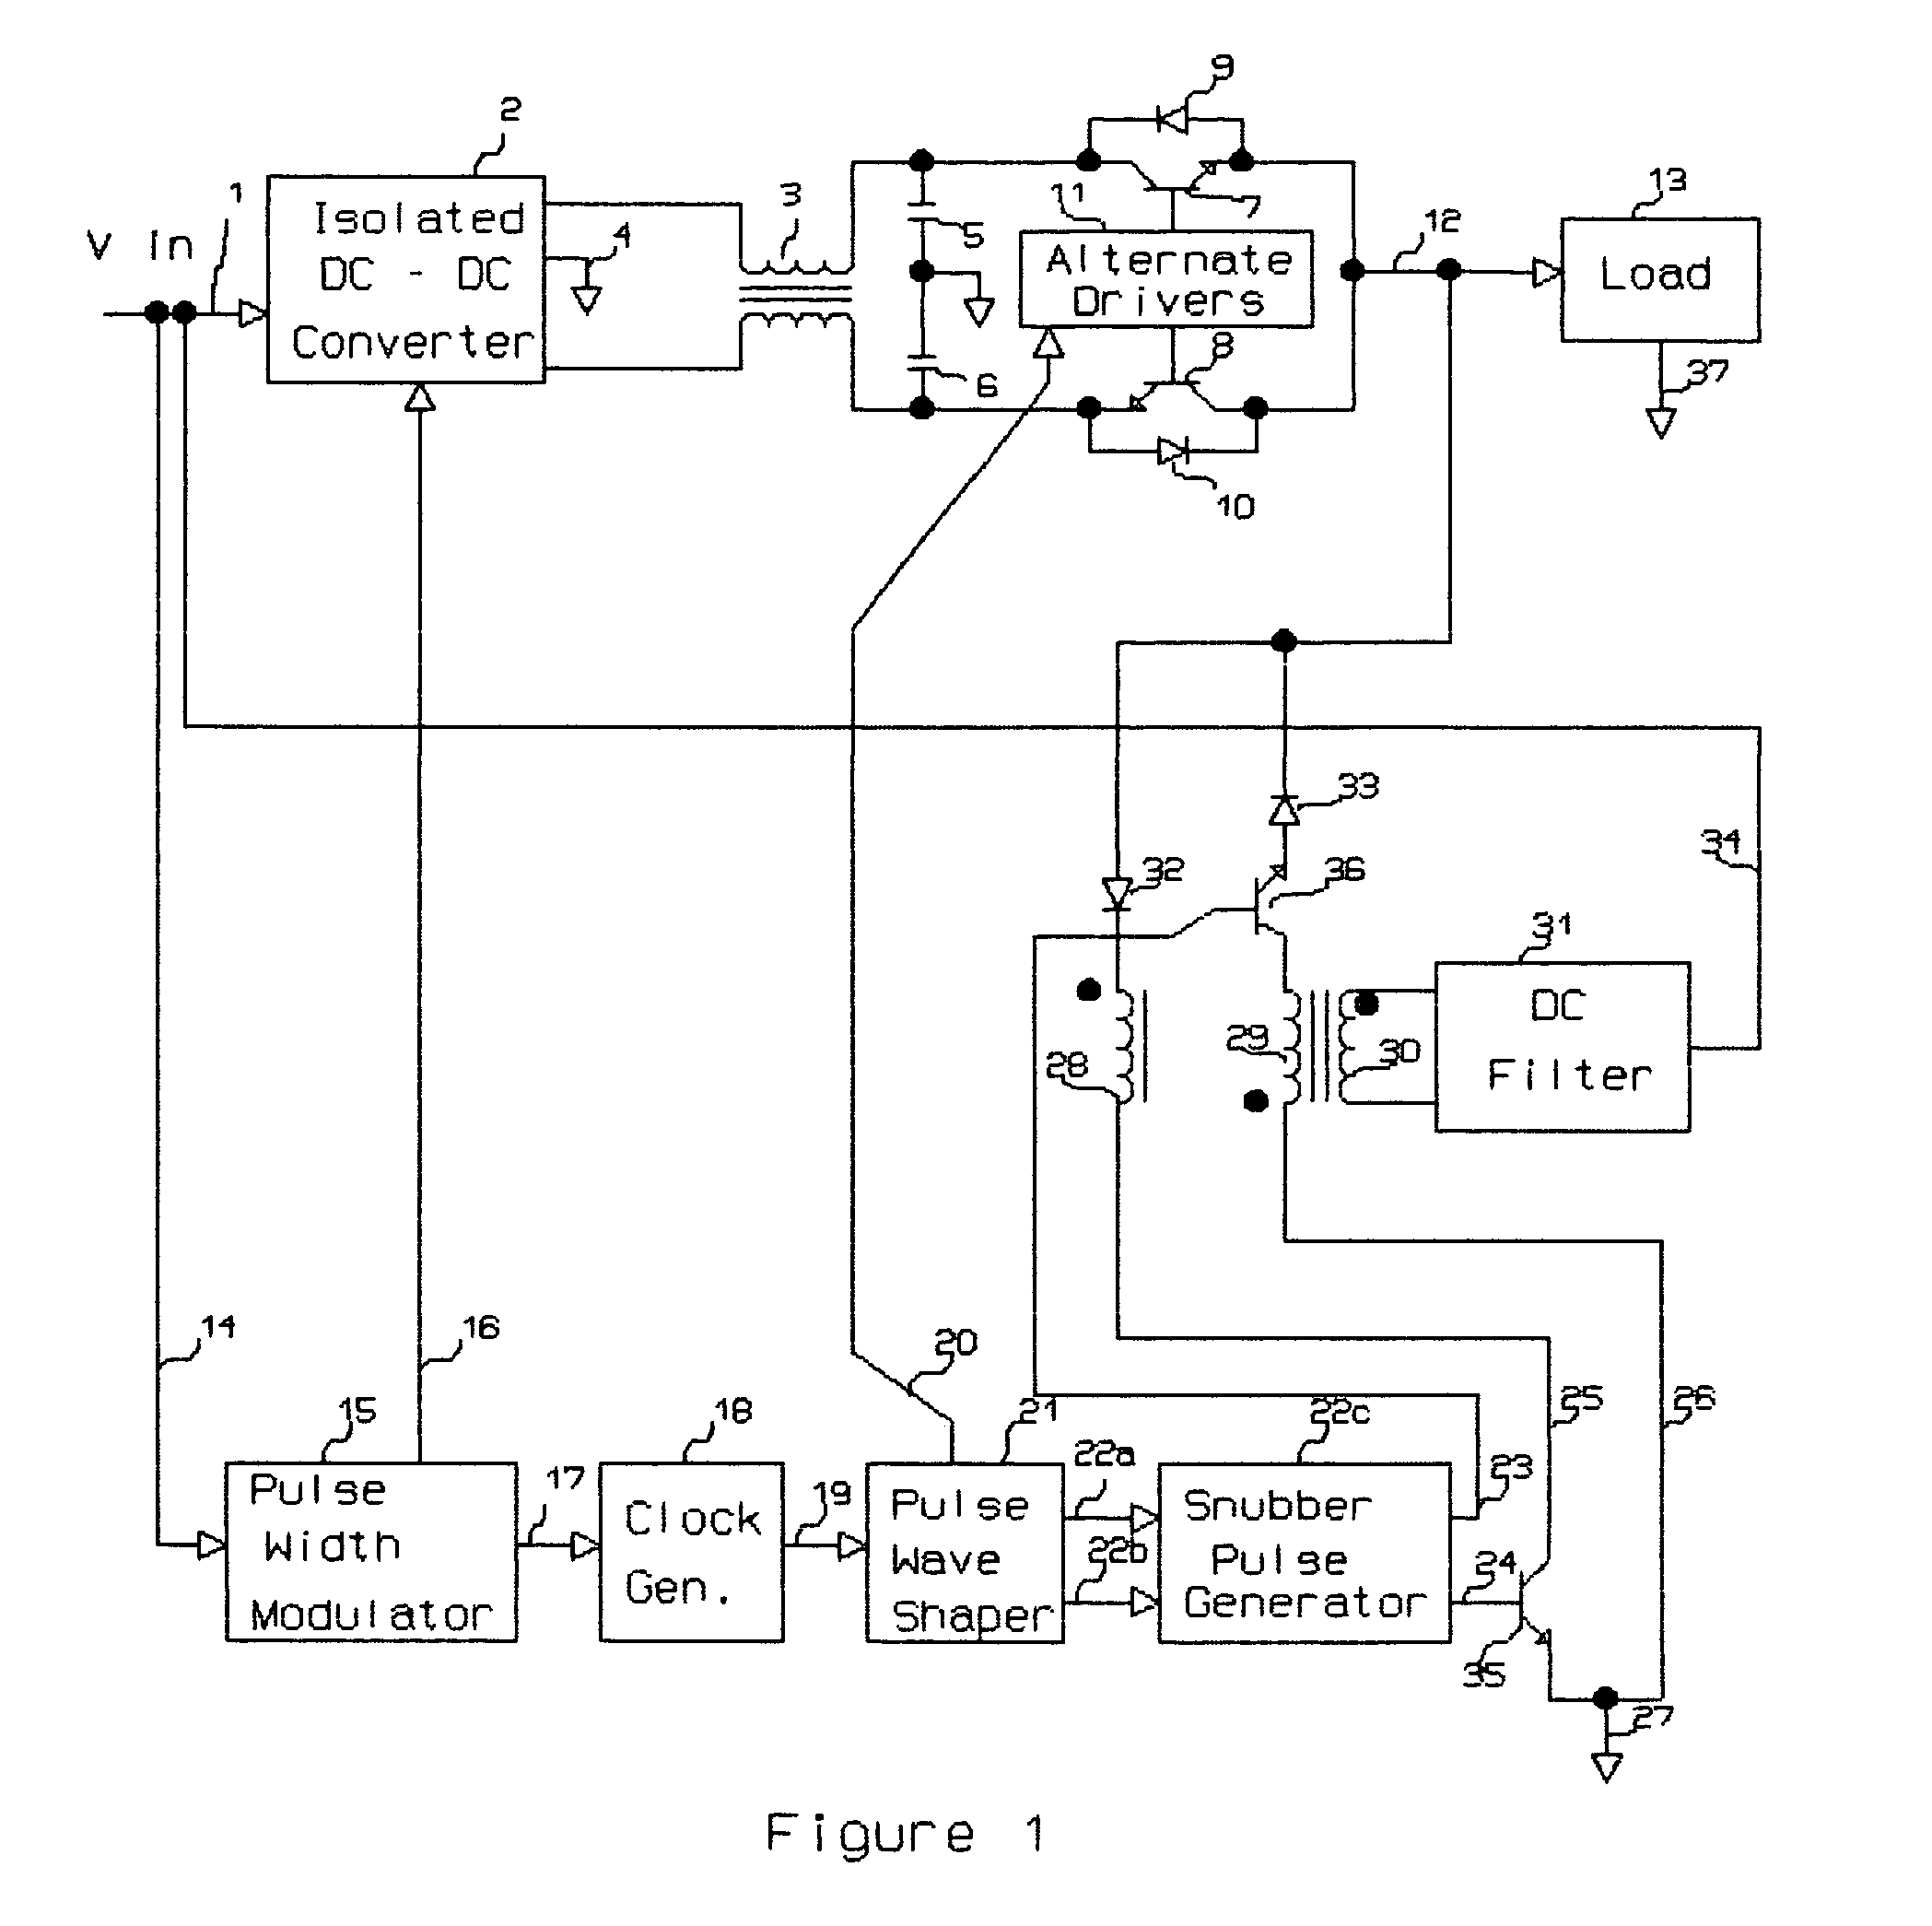 Bi-directionally driven forward converter for neutral point clamping in a modified sine wave inverter